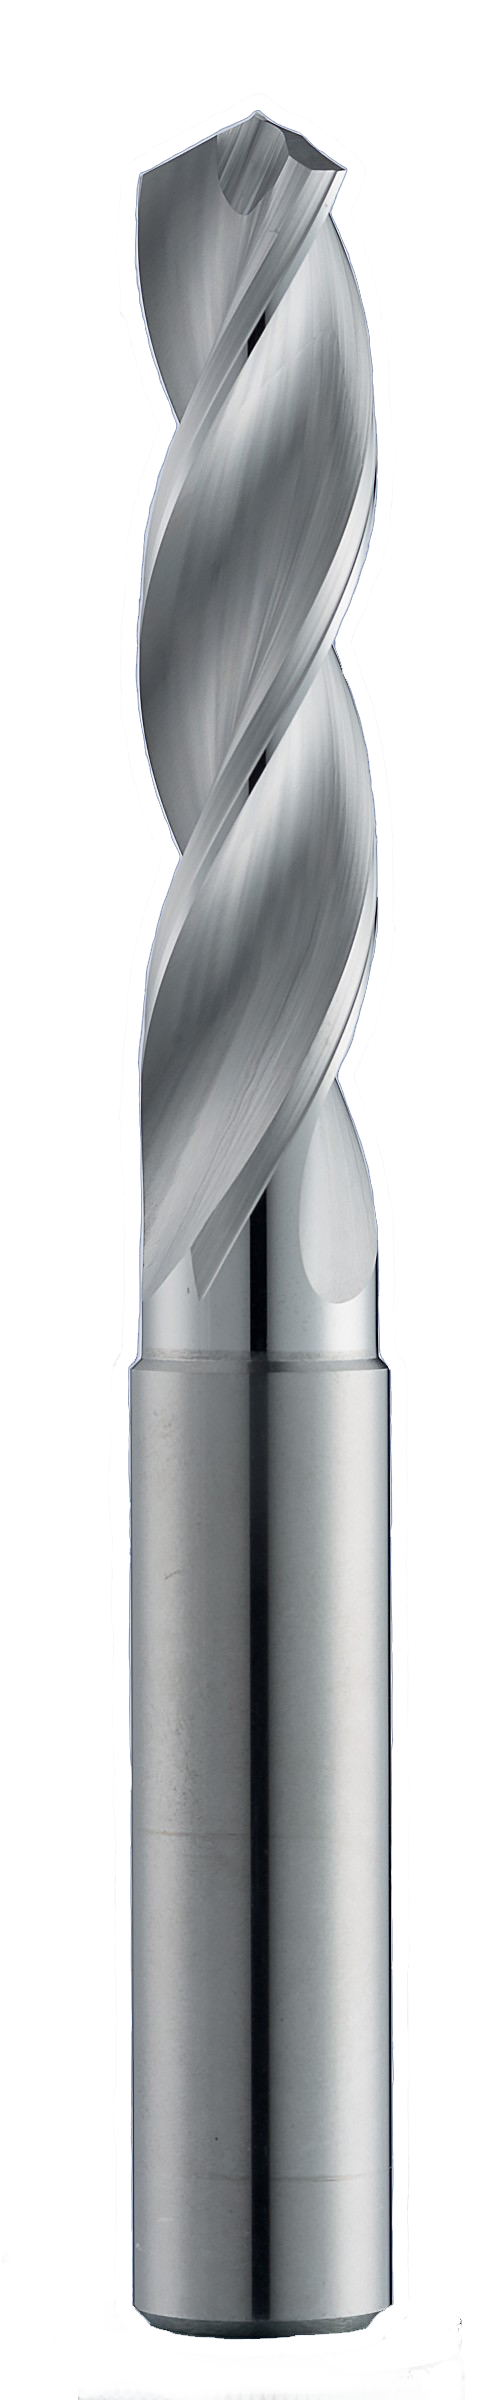 6.80mm Dia, 124 Degree Point, Solid Carbide Drill - 64638